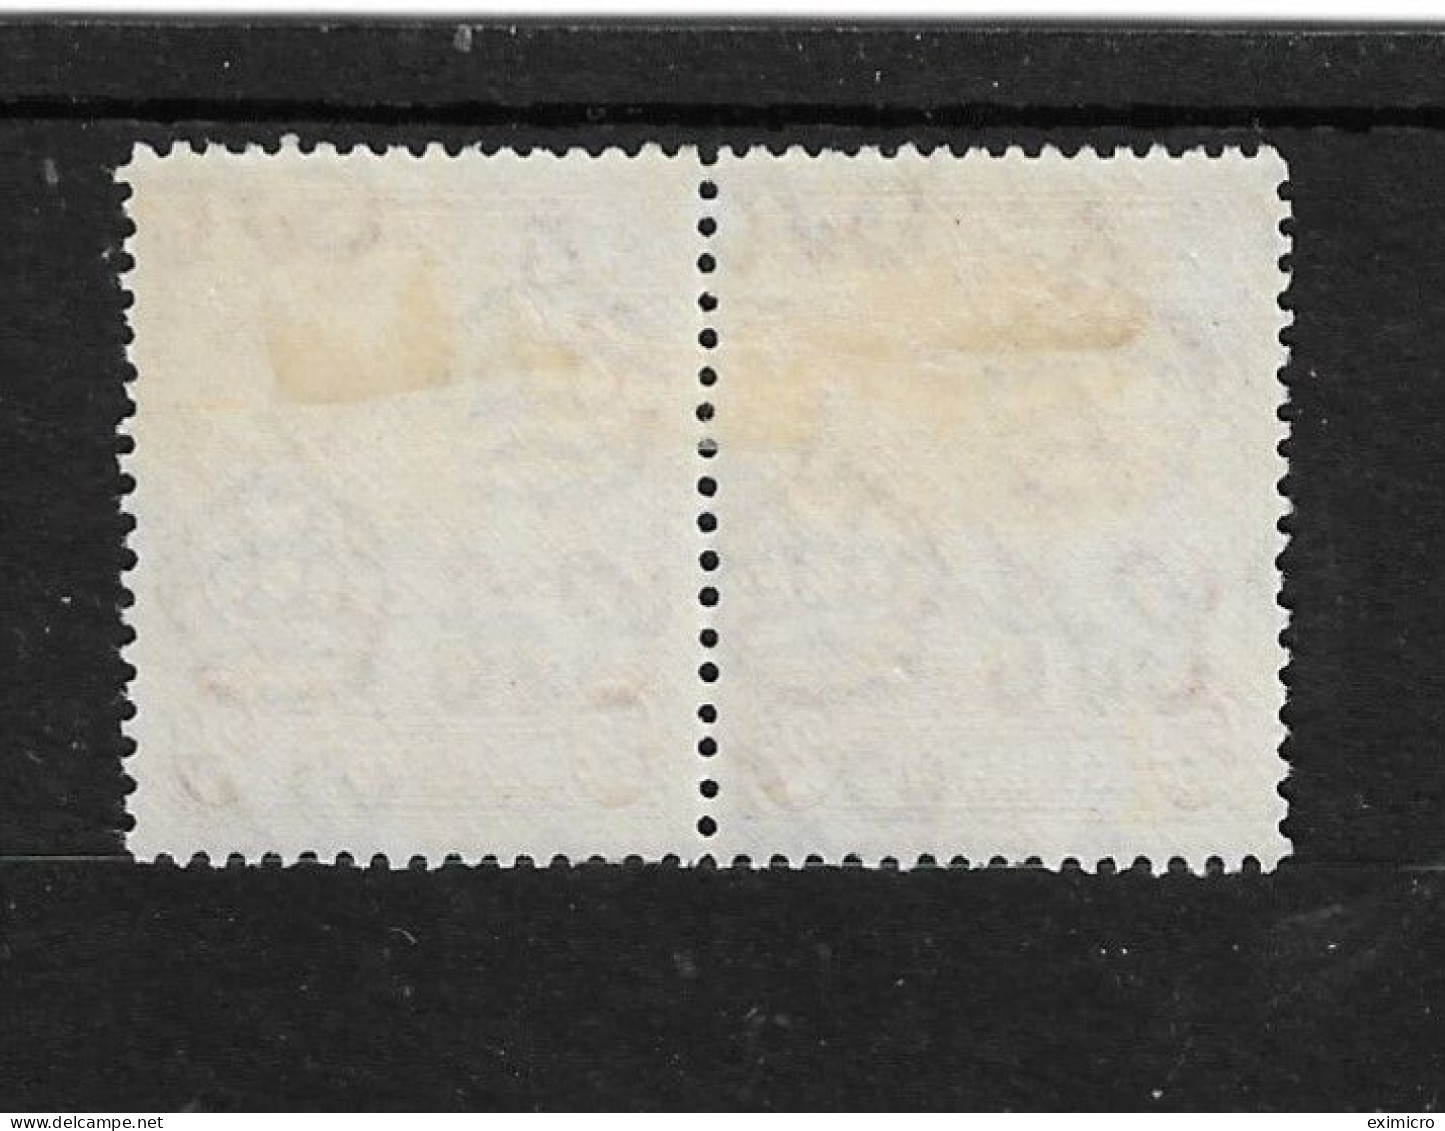 BARBADOS 1938 - 1947 2d CARMINE PERF 13½ X 13 MM PAIR SG 250da/250d ONE SHOWING 'EXTRA FRAME LINE '' VARIETY Cat £66+ - Barbades (...-1966)